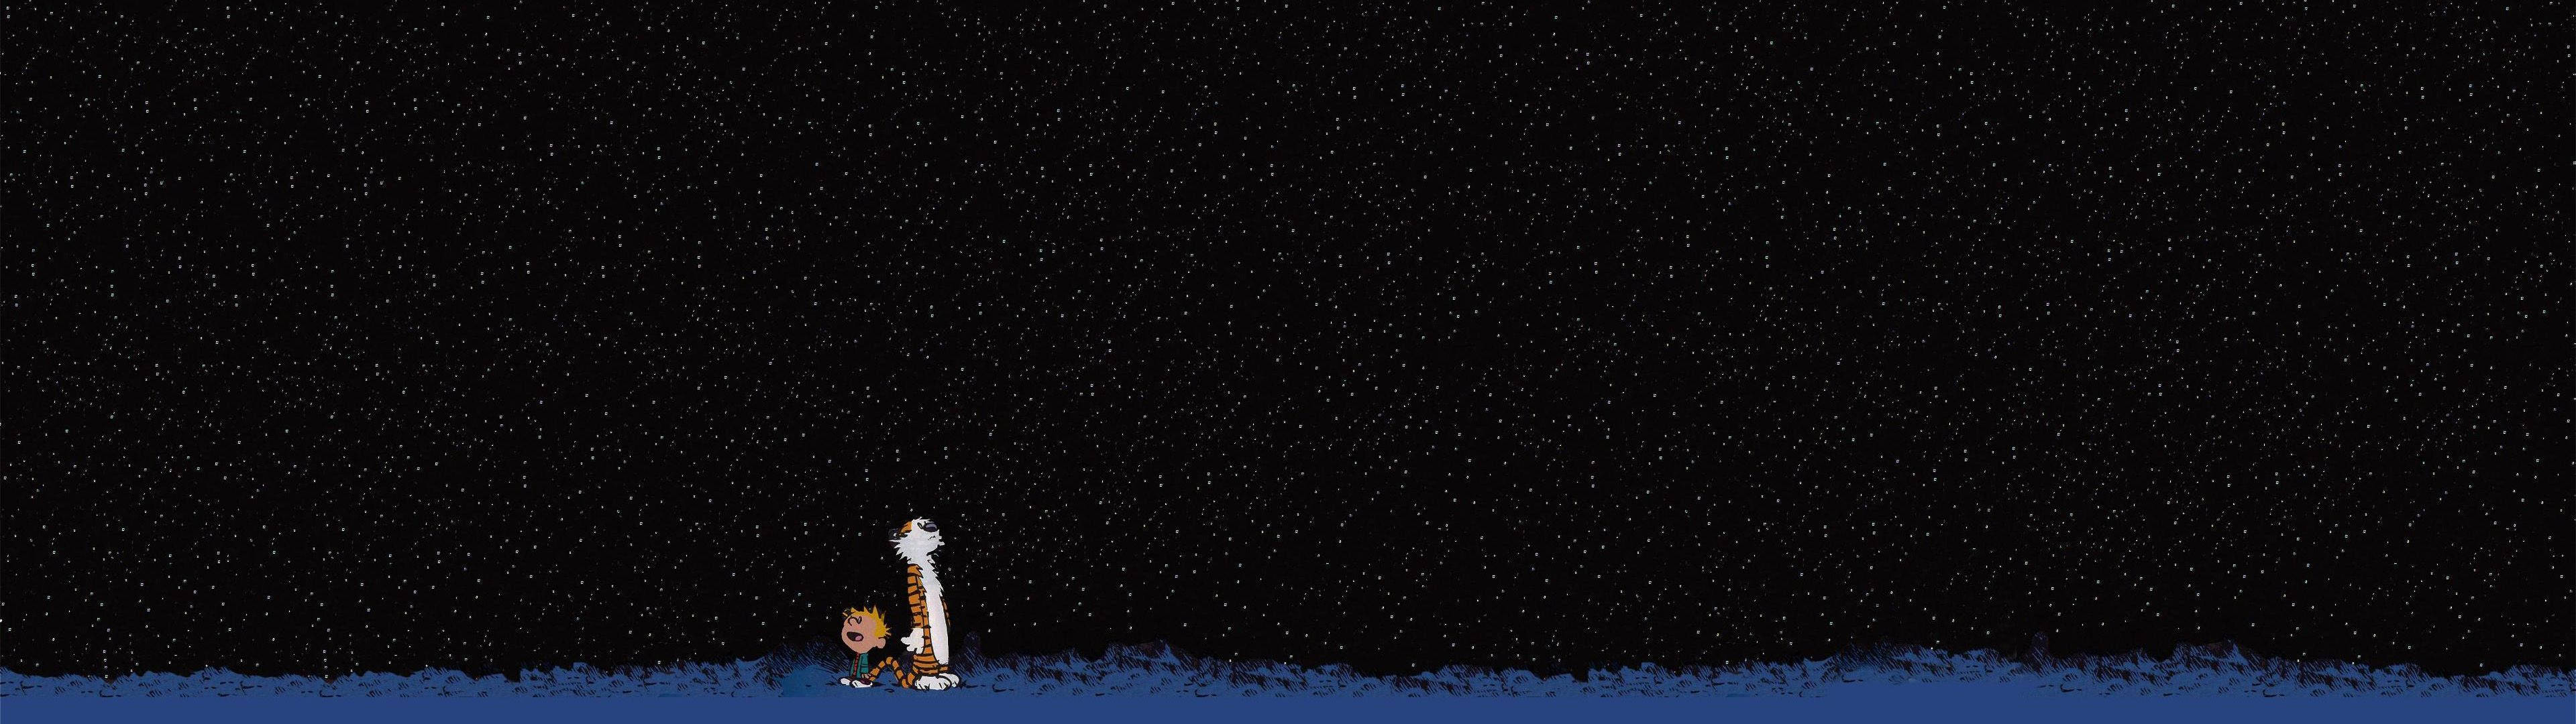 3840X1080 Calvin And Hobbes Wallpaper and Background